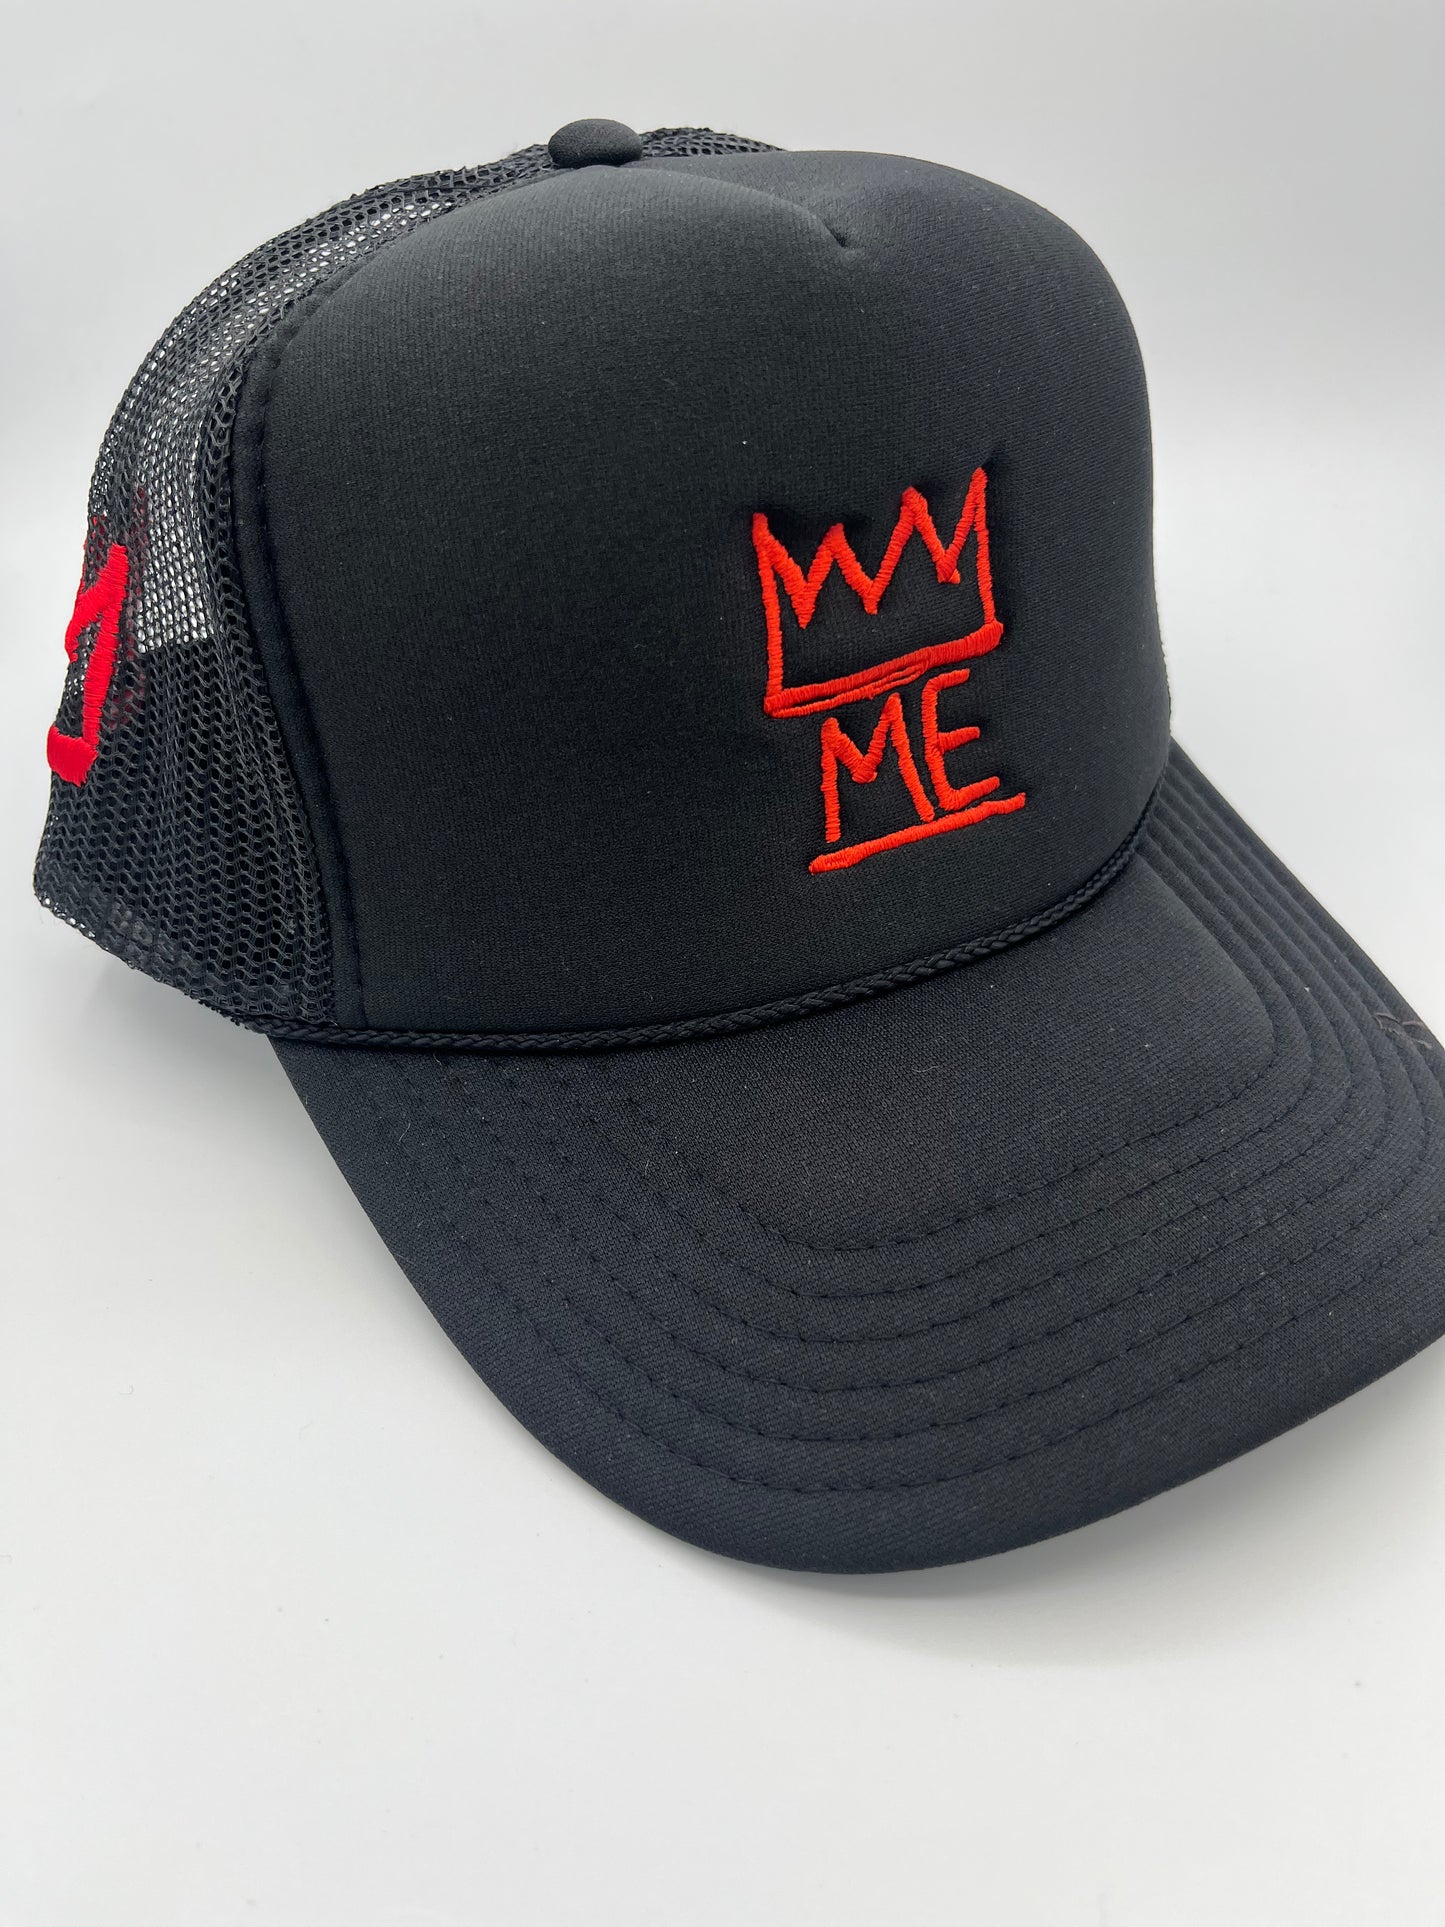 Black Trucker with Red Krown